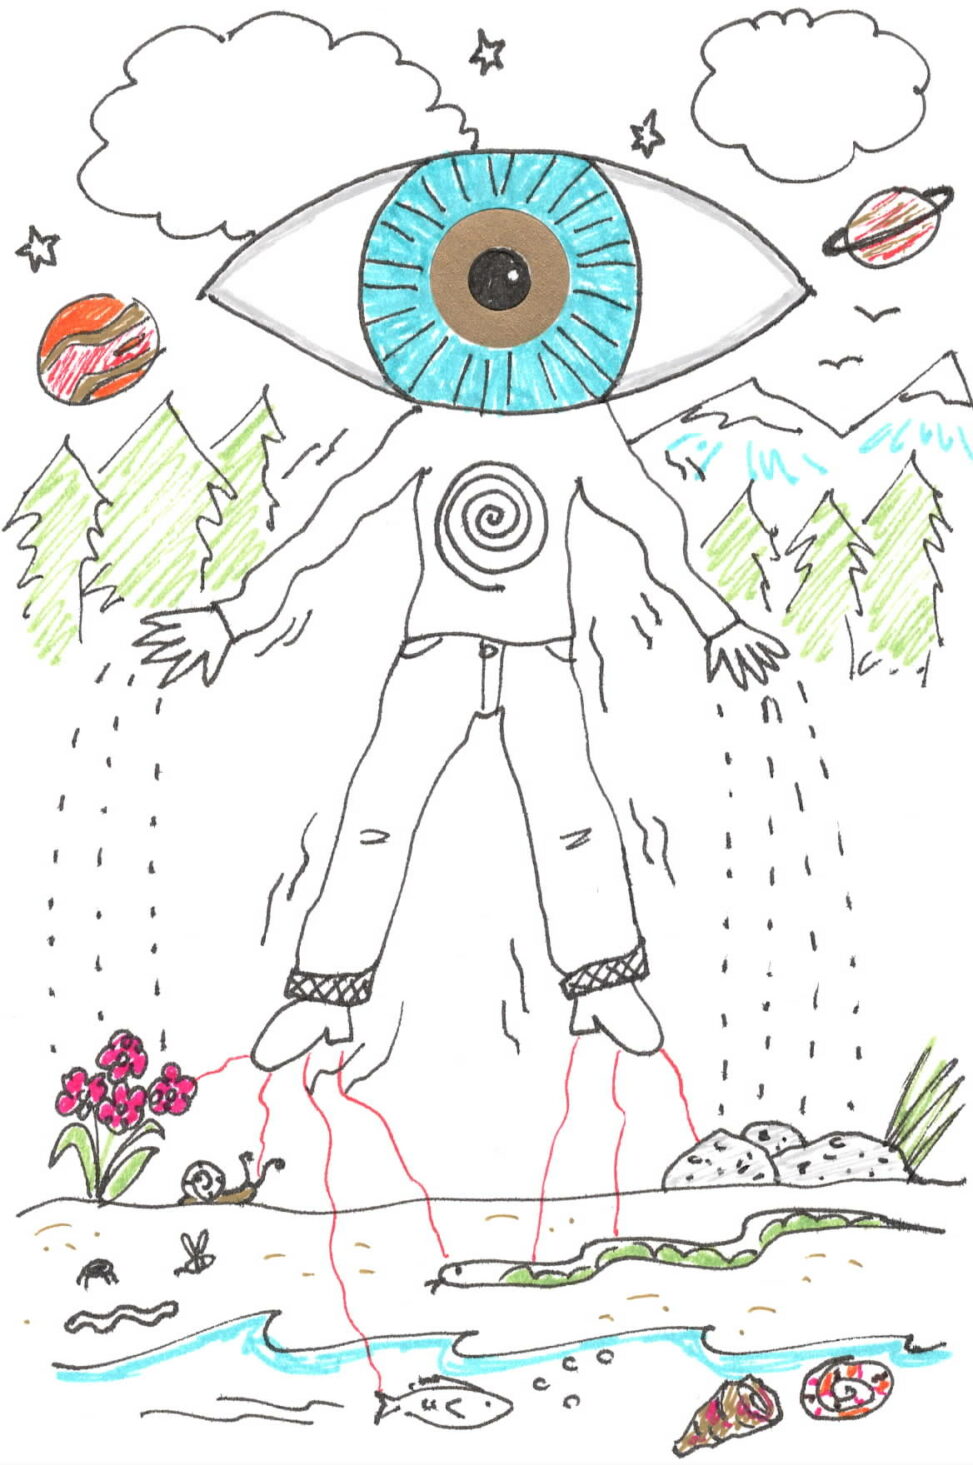 A person with a giant eyeball for a head vibrating to the energy of the cosmos.